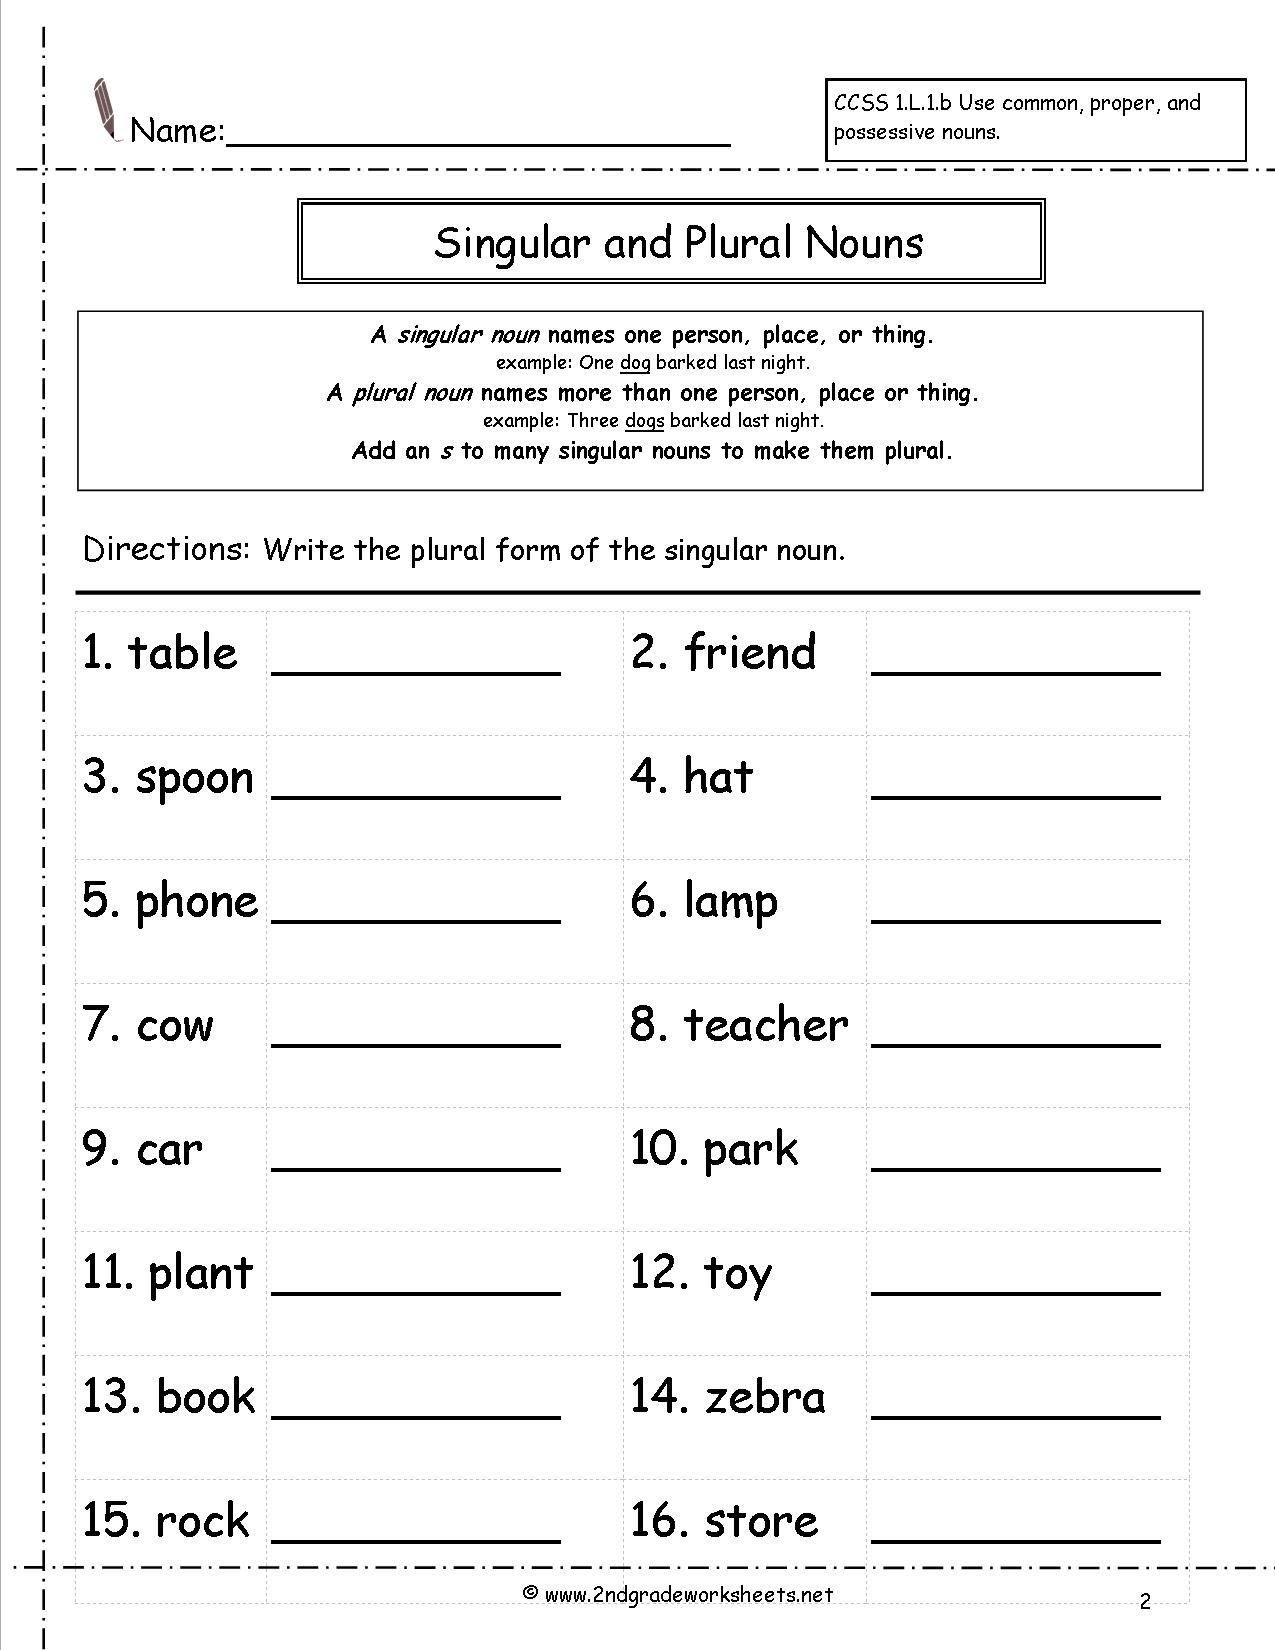 Singular And Plural Nouns Worksheets Middle School